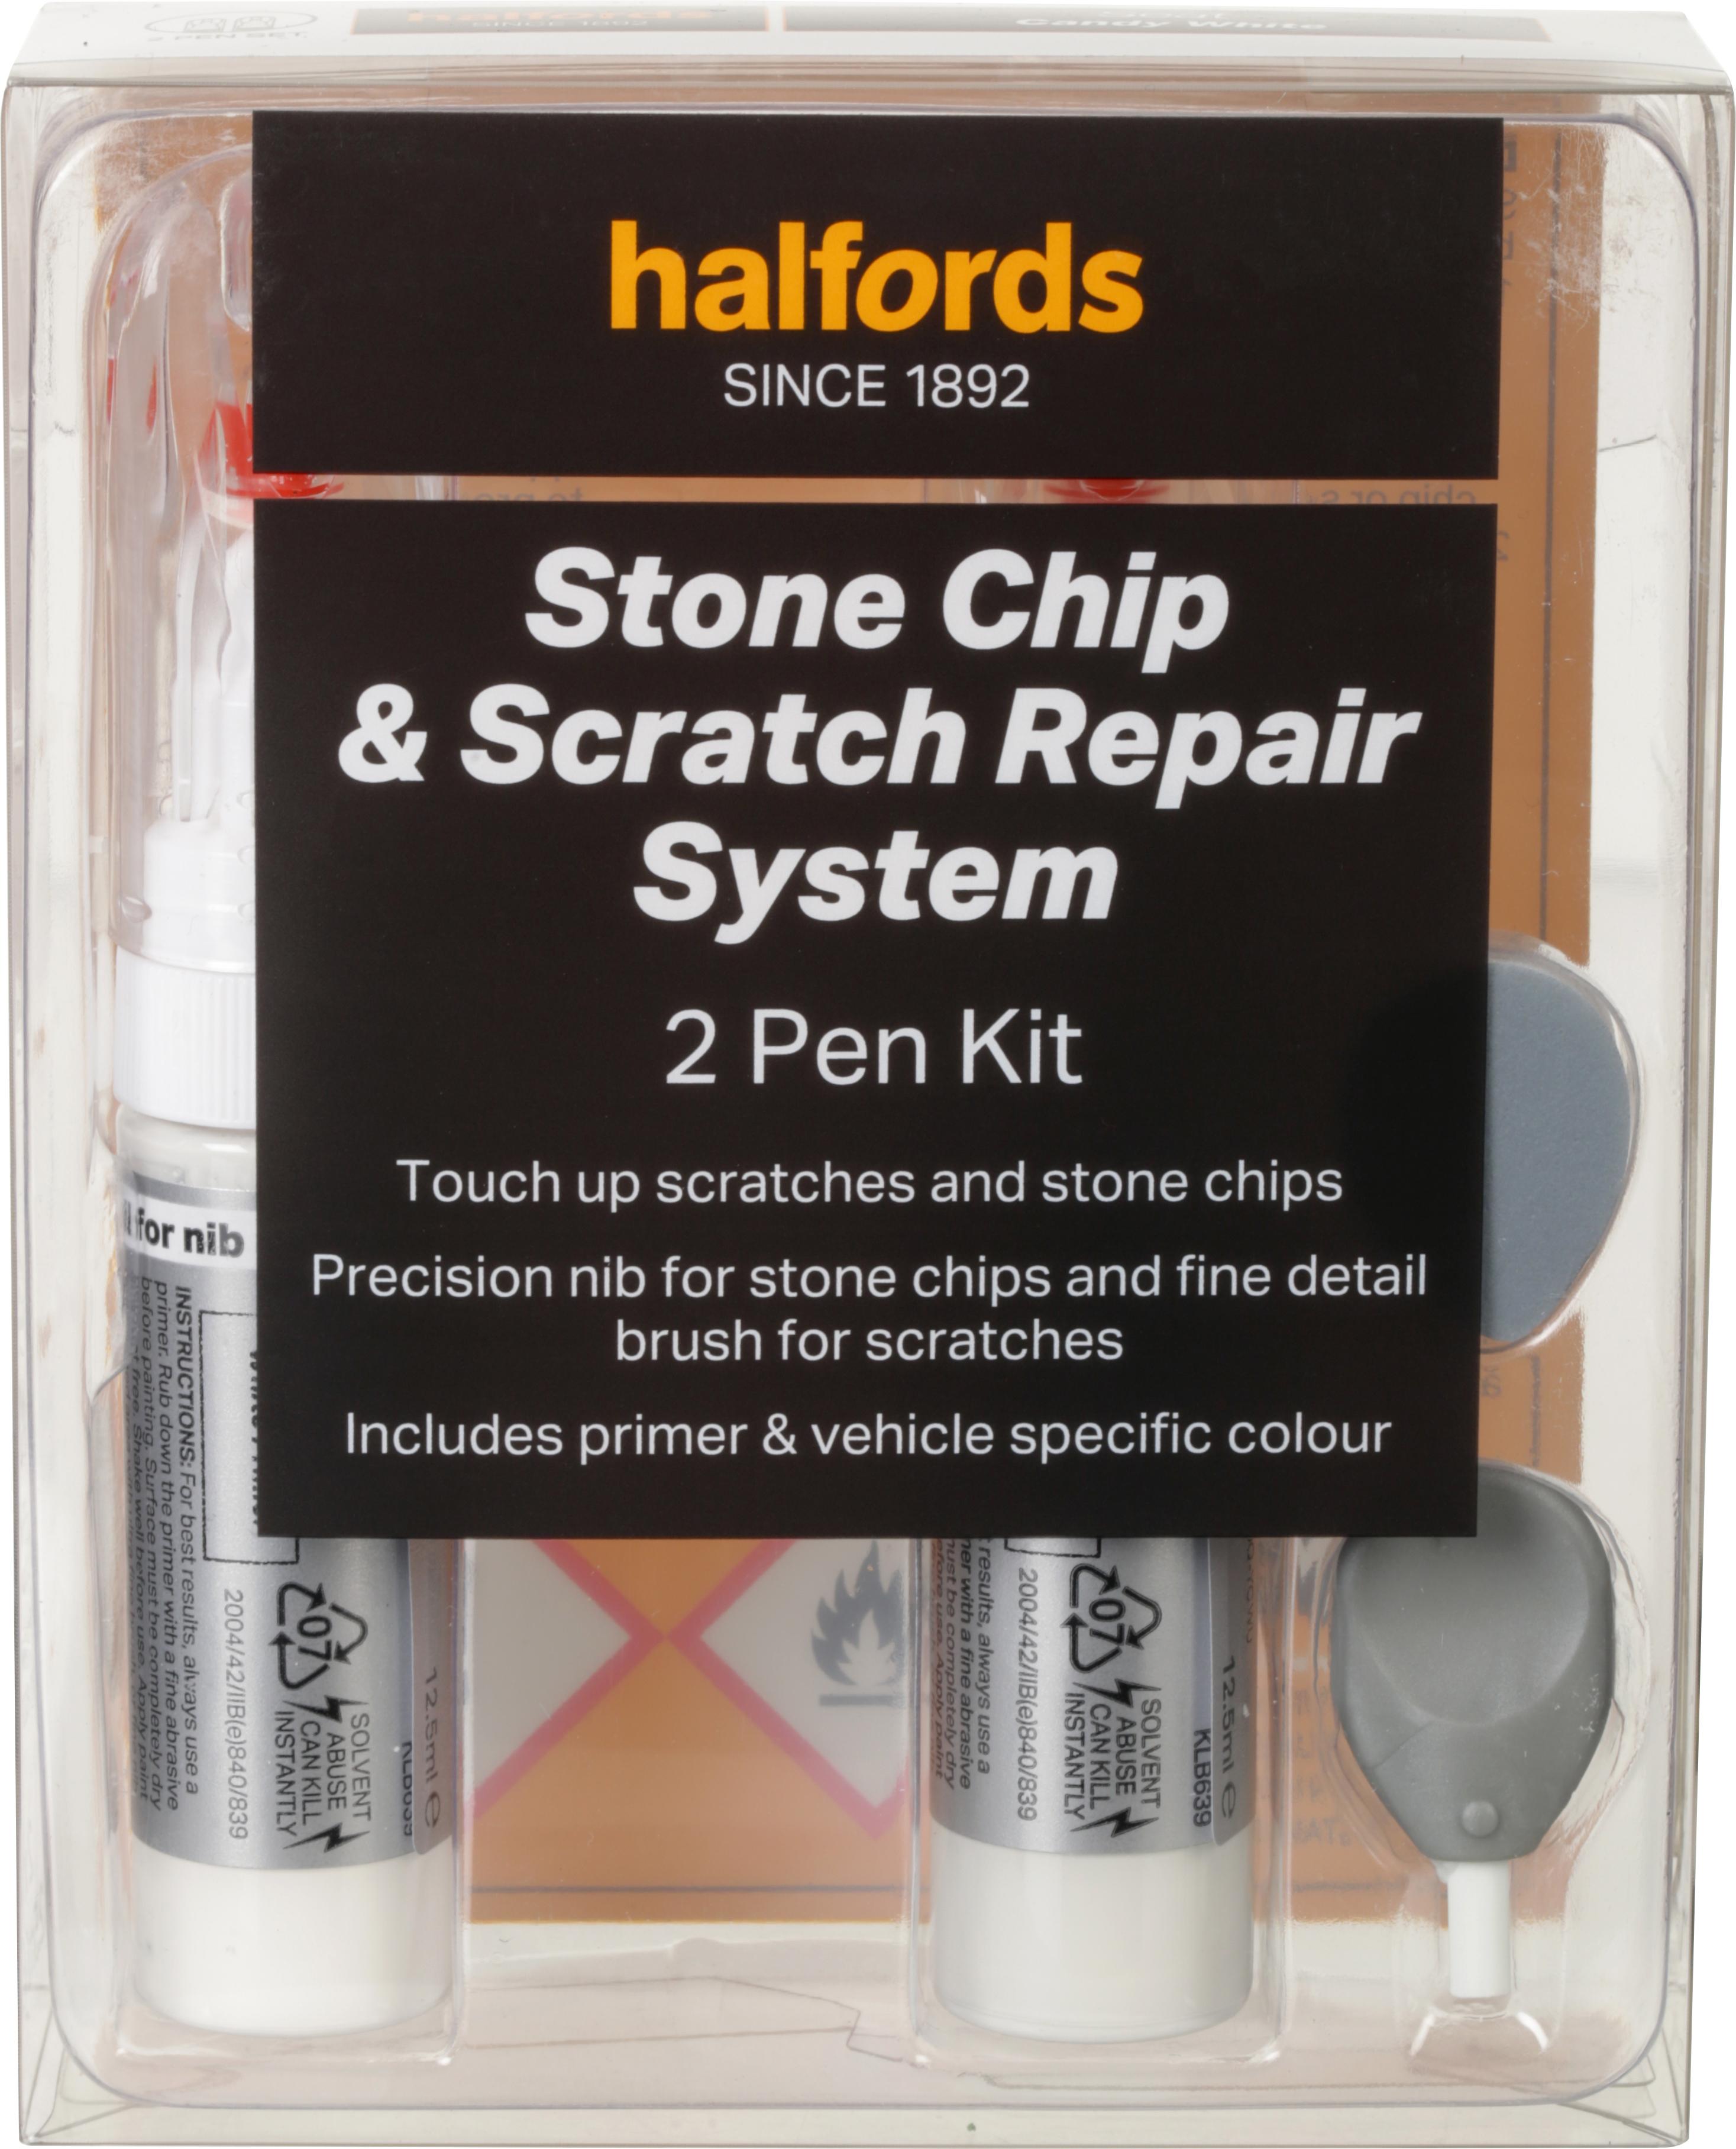 Halfords Seat Candy White Scratch & Chip Repair Kit